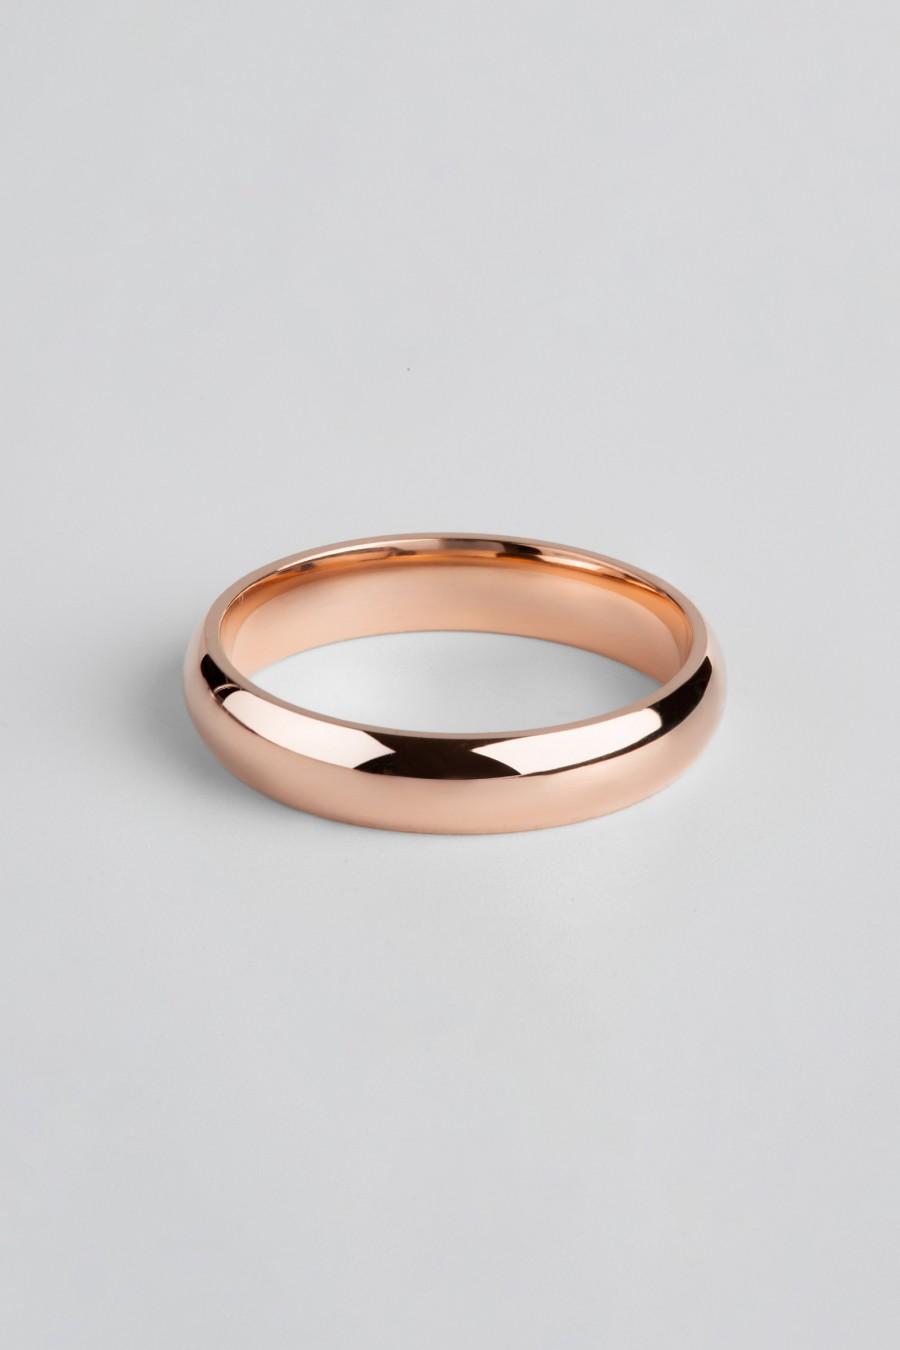 Mariage - 14k Rose Gold Band - CLASSIC DOME / Polished / Comfort Fit / Men's Women's Wedding Ring / Simple Wedding Ring